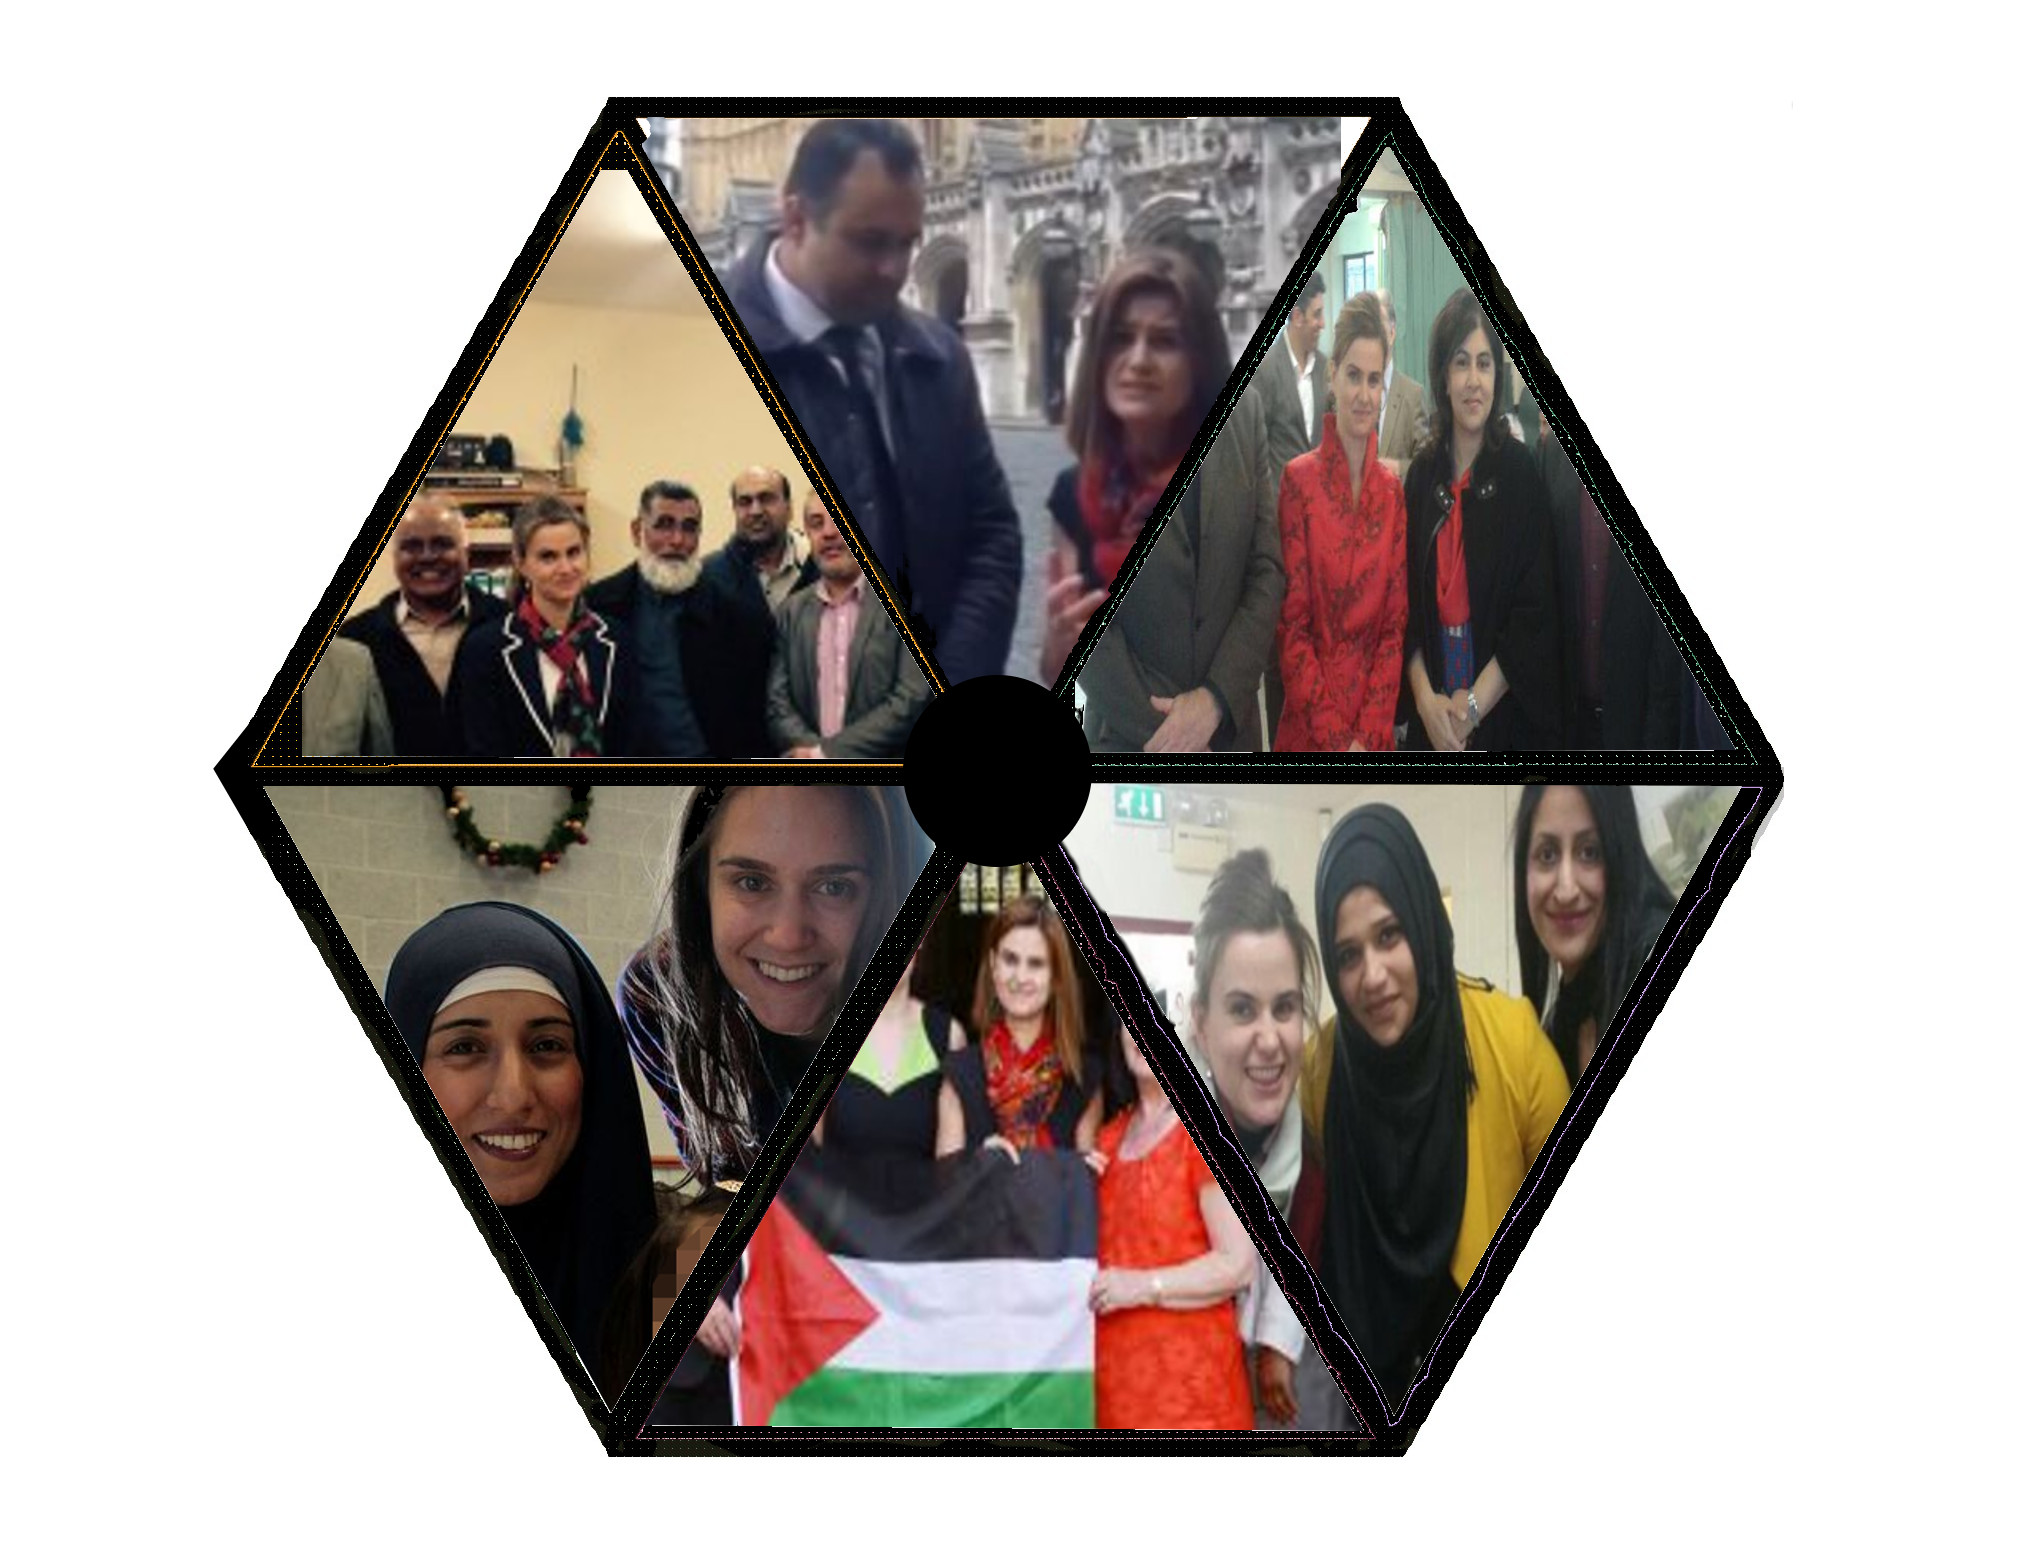 The 'Jo Cox wheel of Islamic appeasement' game graphic